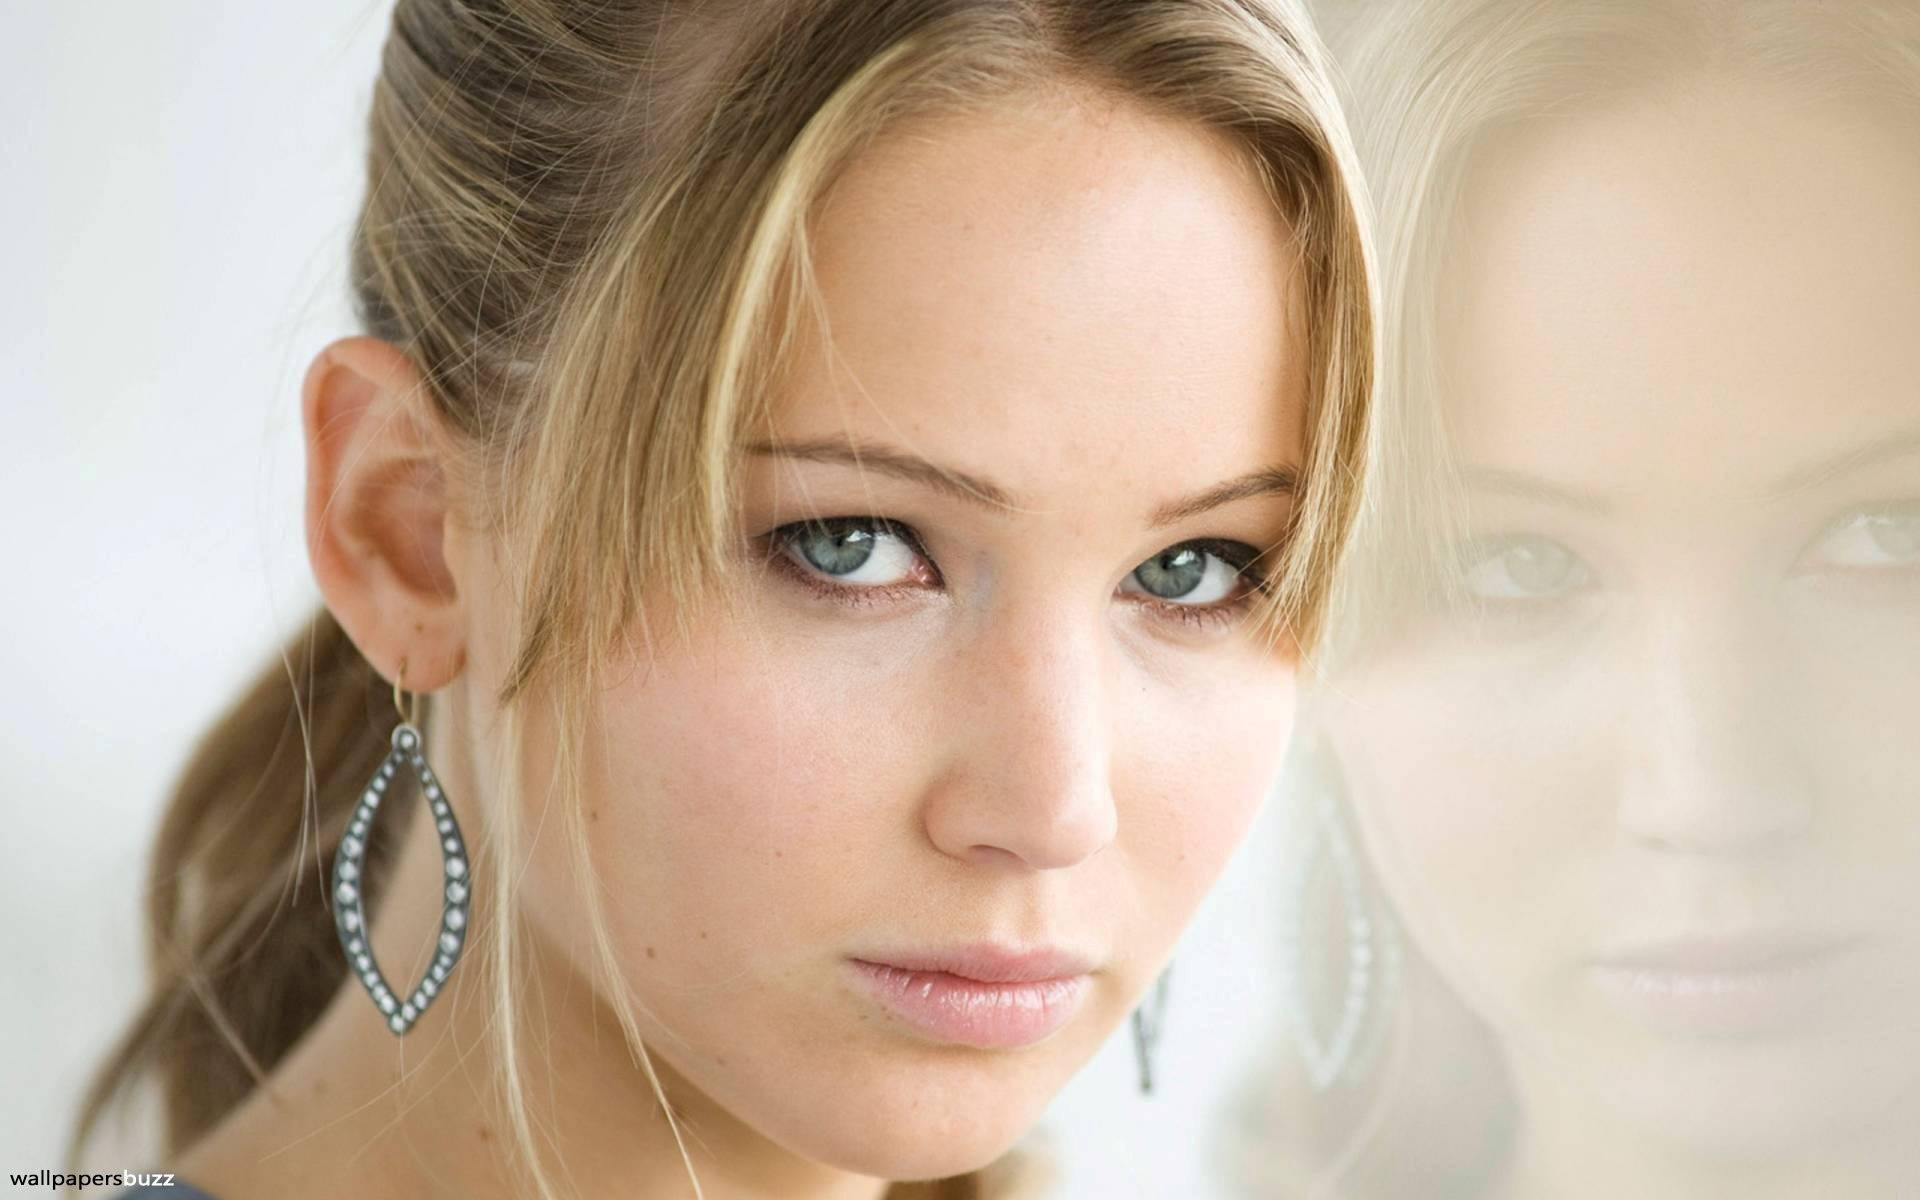 Jennifer Lawrence is an American actress and producer. She is the most profitable Hollywood actress - Jennifer Lawrence